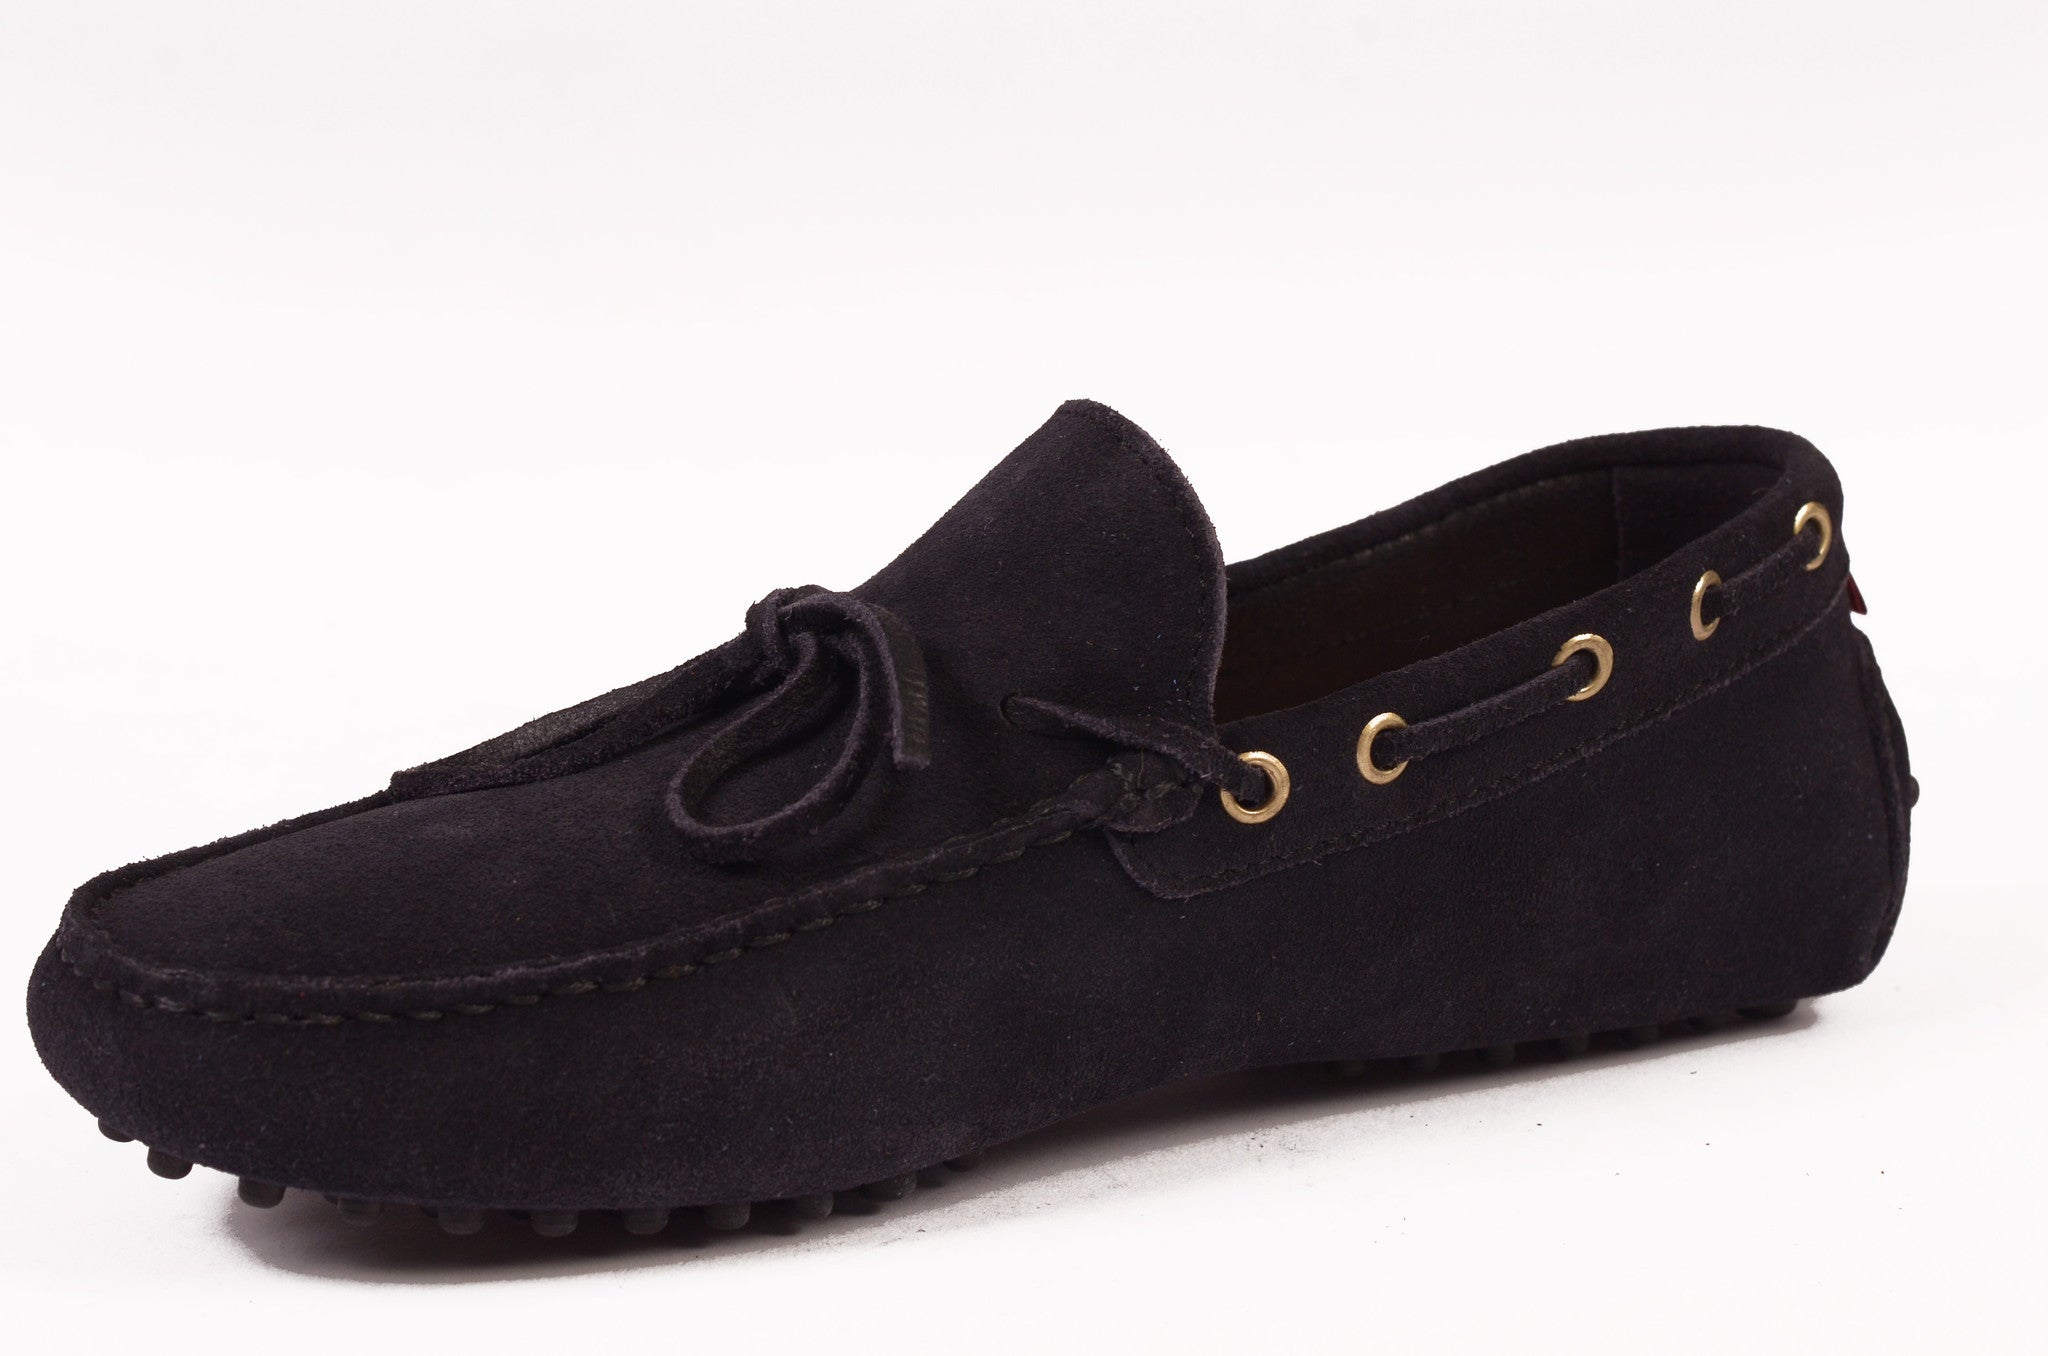 KITON NAPOLI Navy Blue Suede Loafers Driving Car Shoes Moccasins NEW - SARTORIALE - 4